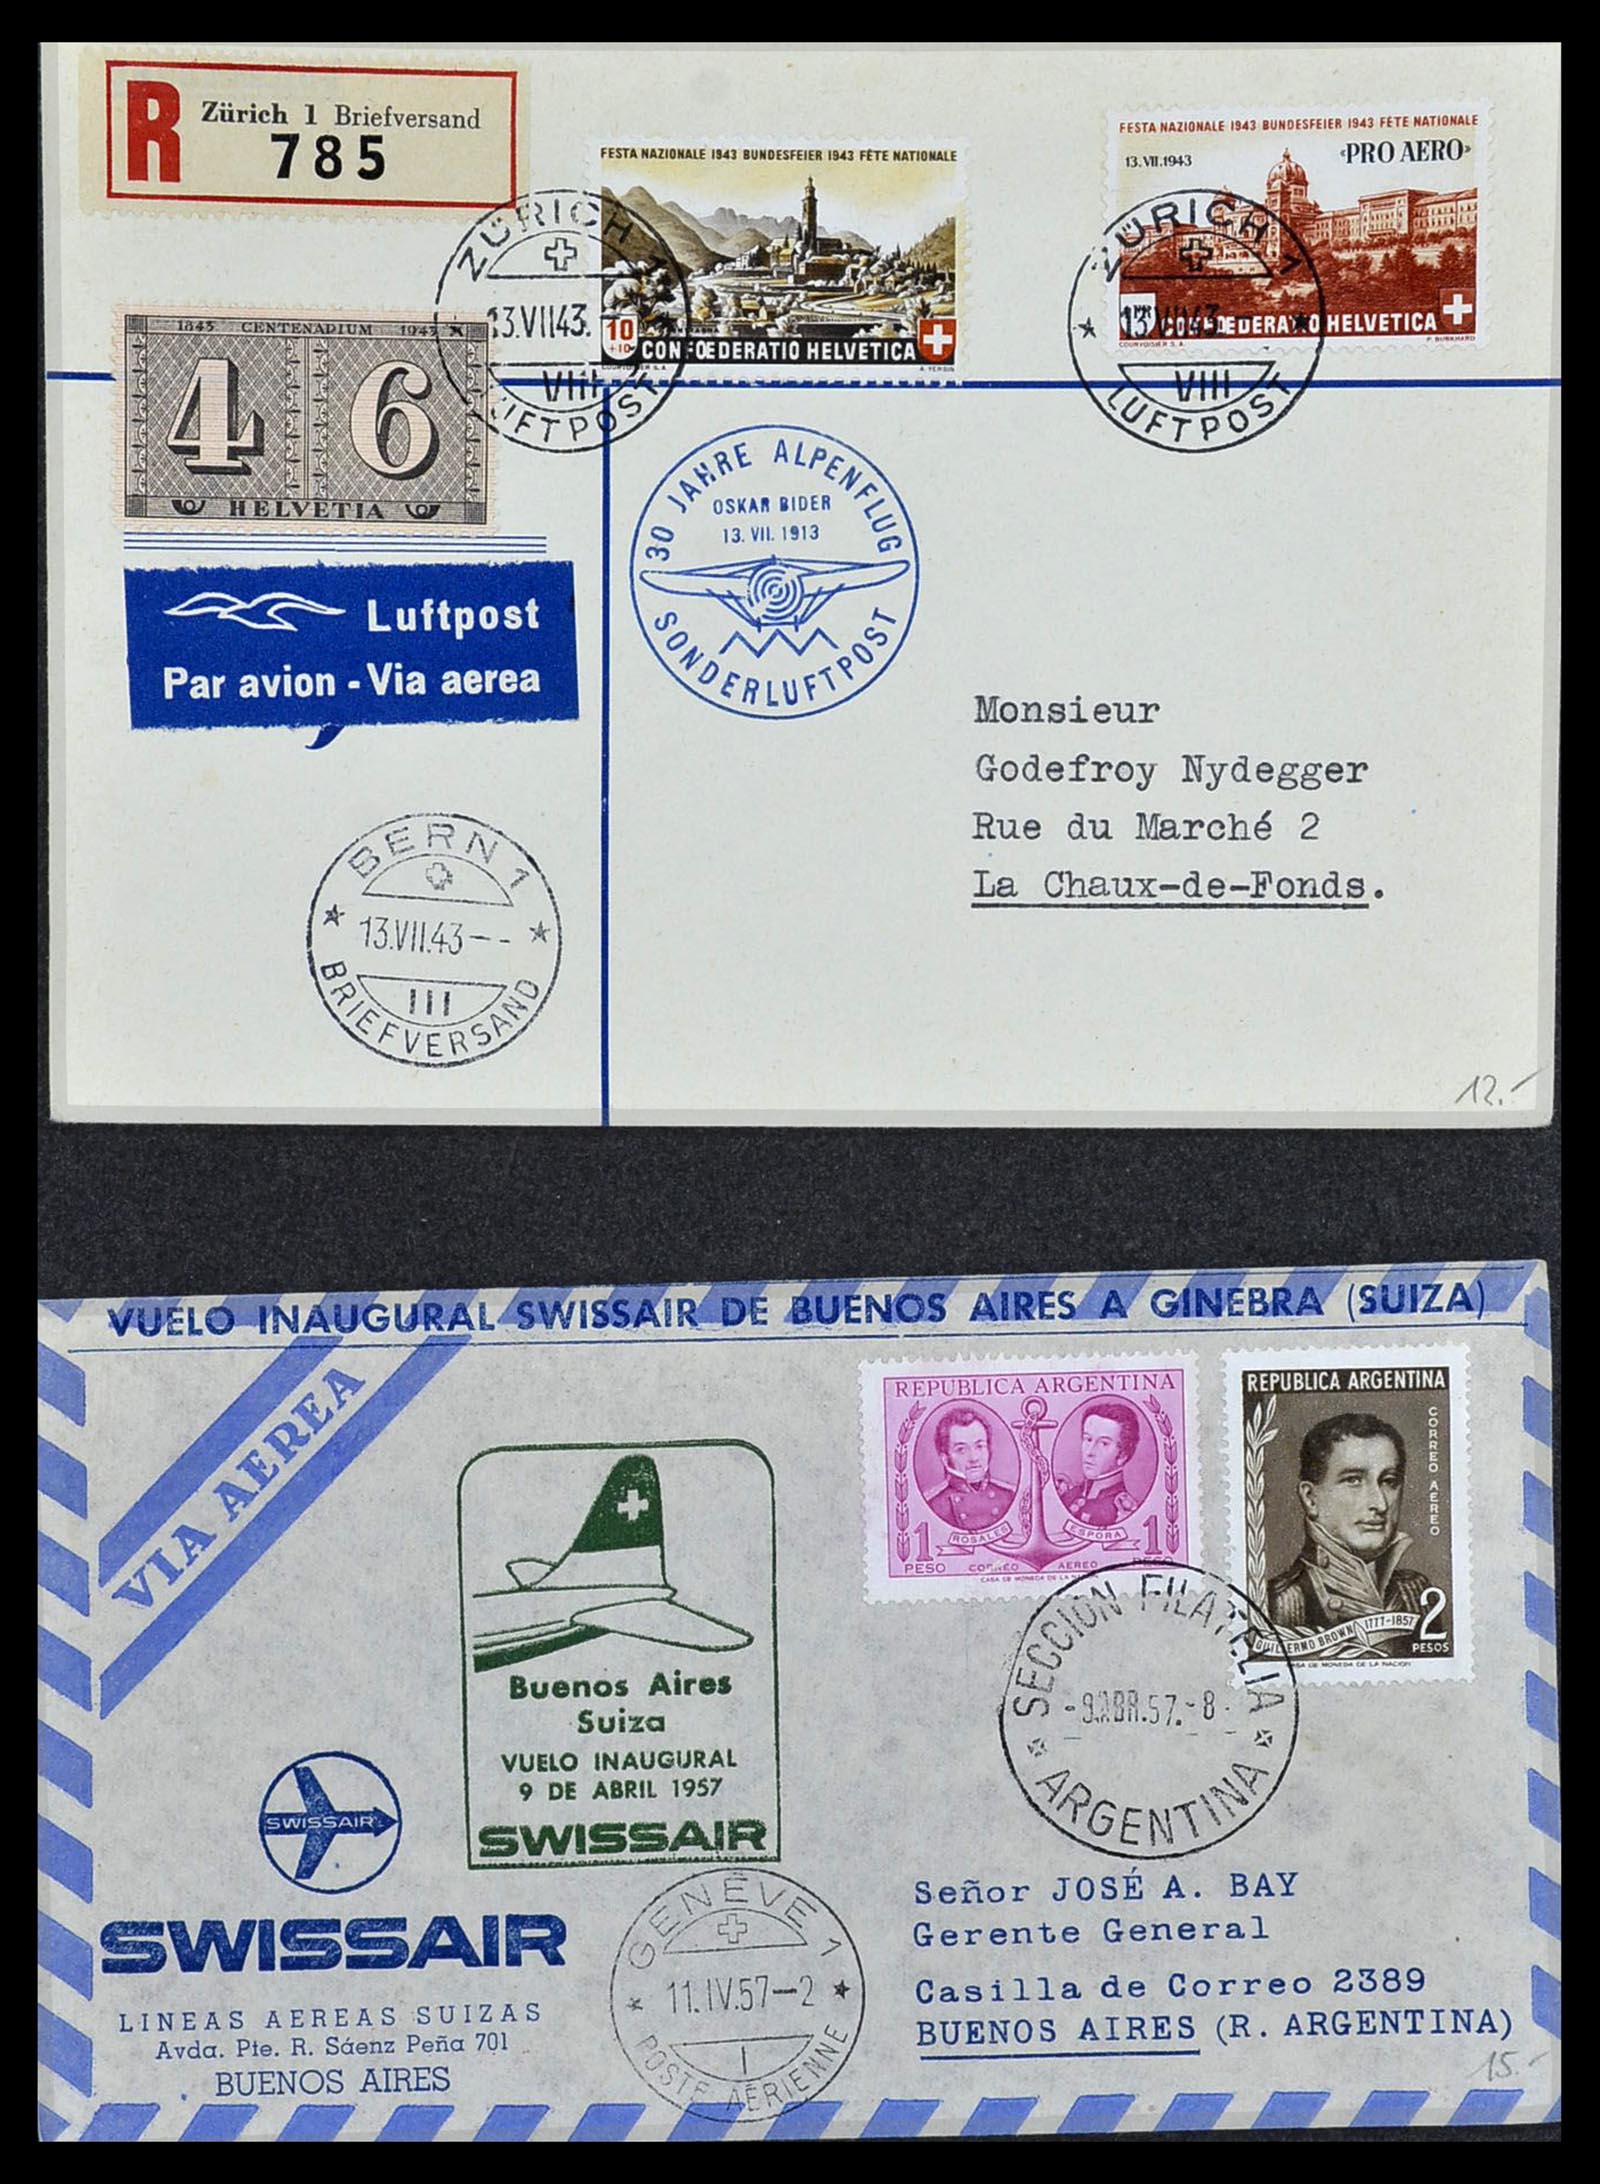 34141 044 - Stamp collection 34141 Switzerland airmail covers 1920-1960.